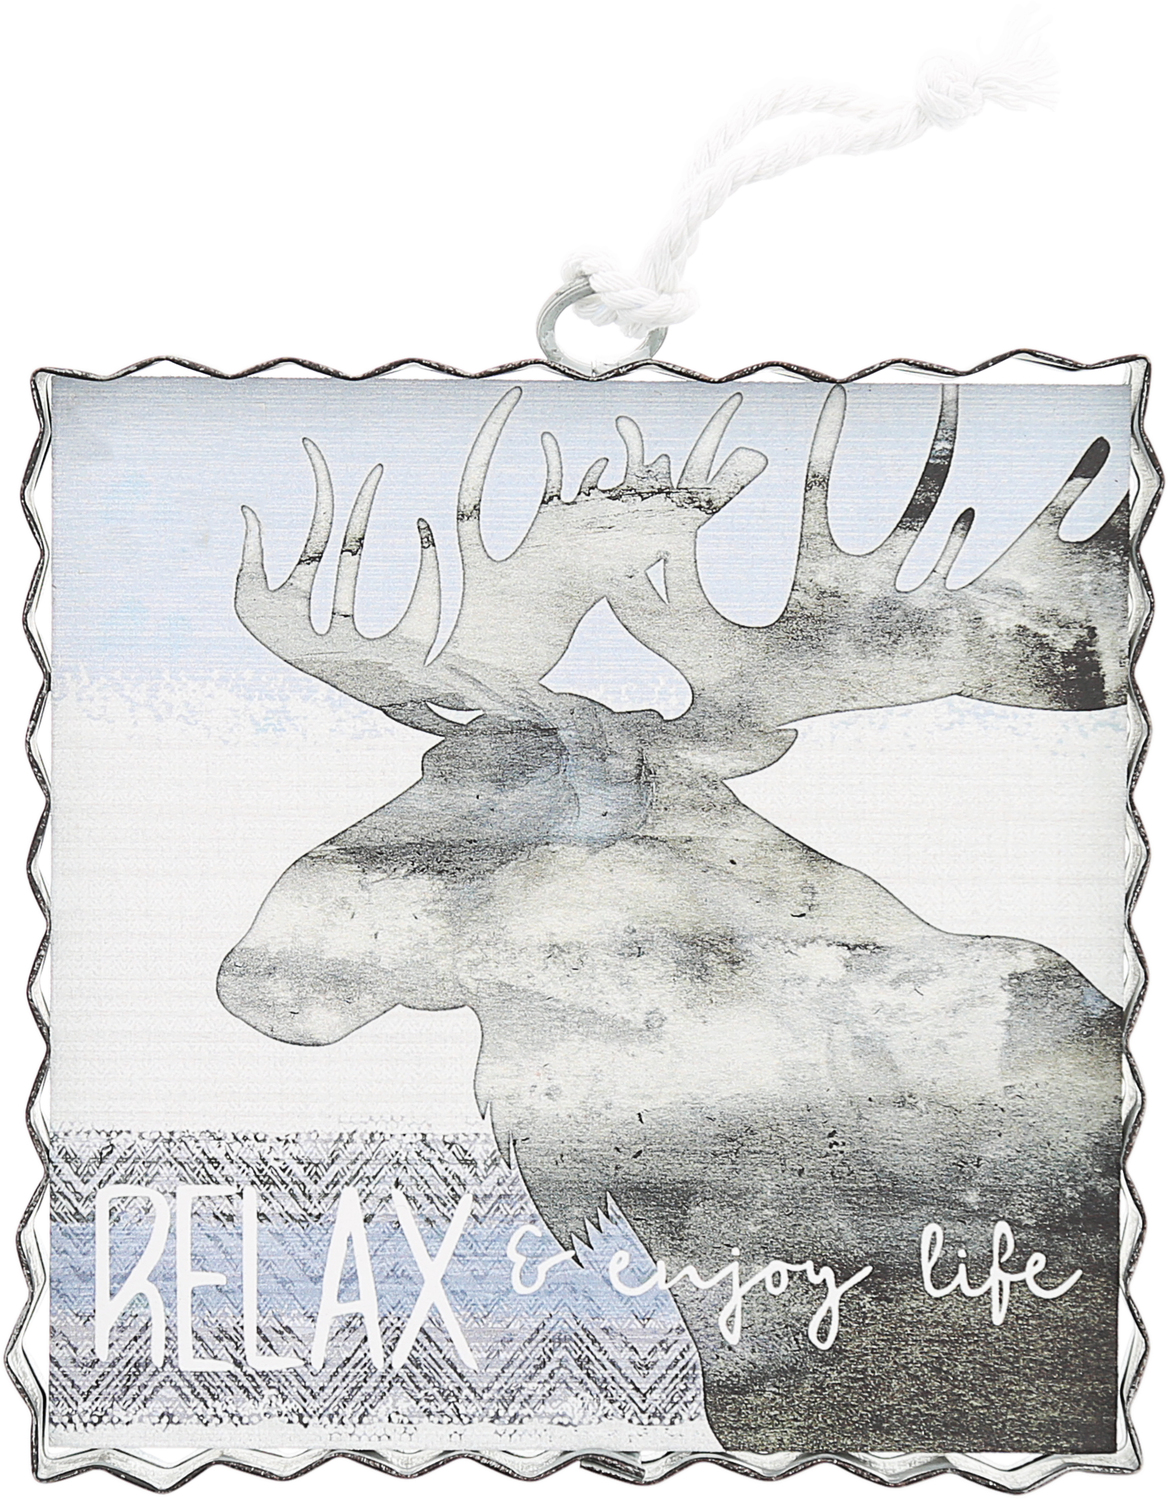 Relax by Wild Woods Lodge - Relax - 6" Plaque